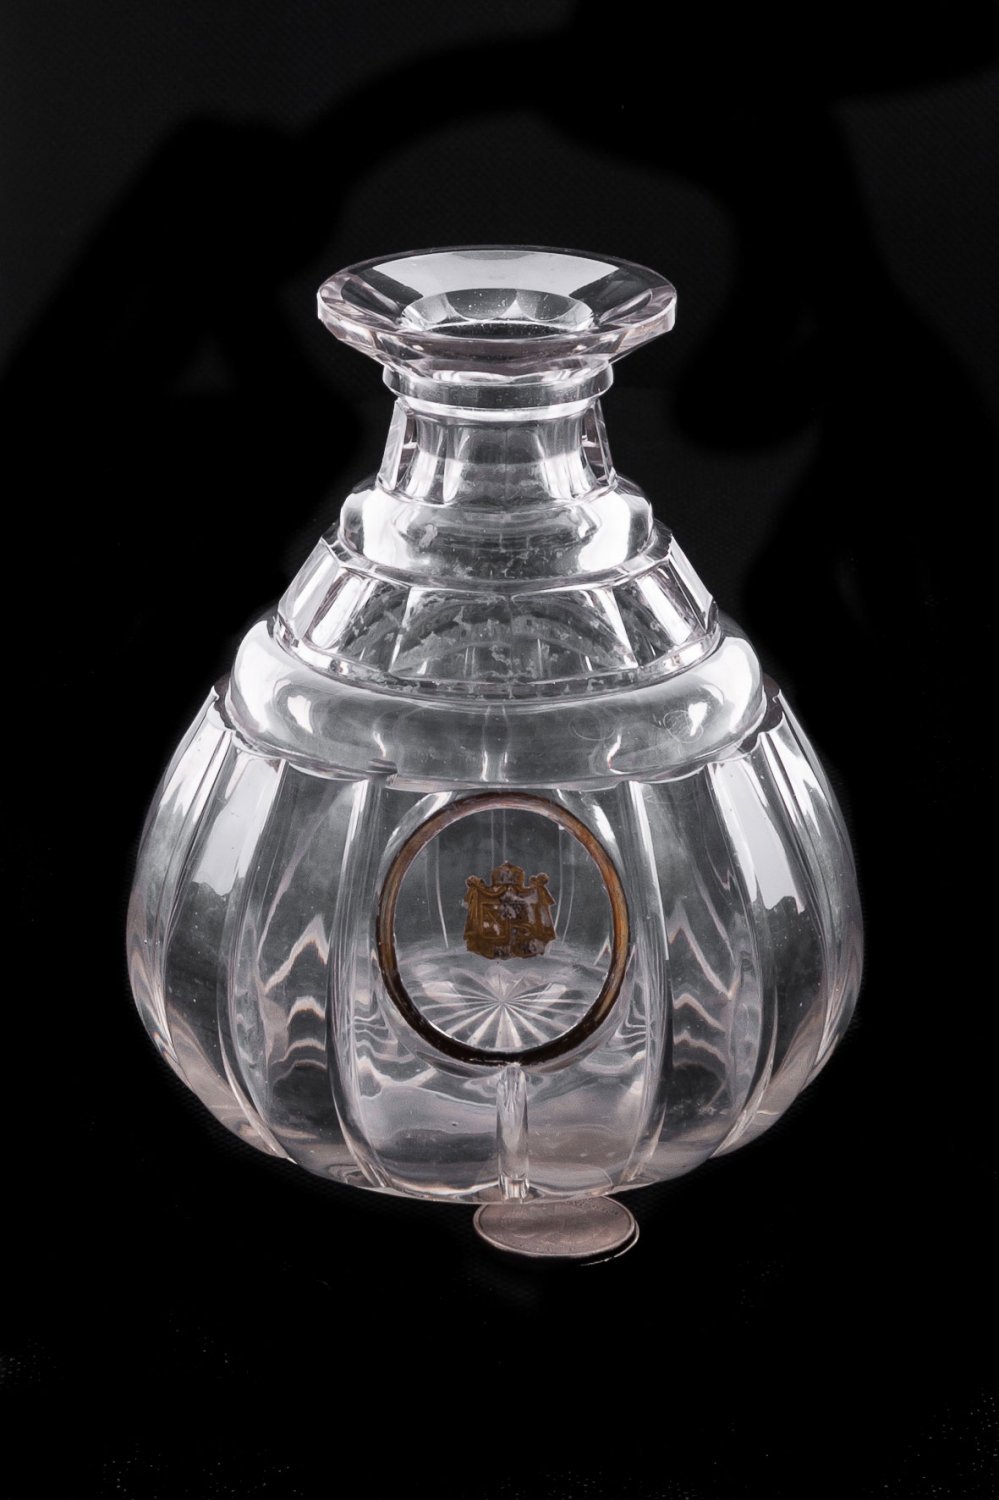 Decanter with the family coat of arms.